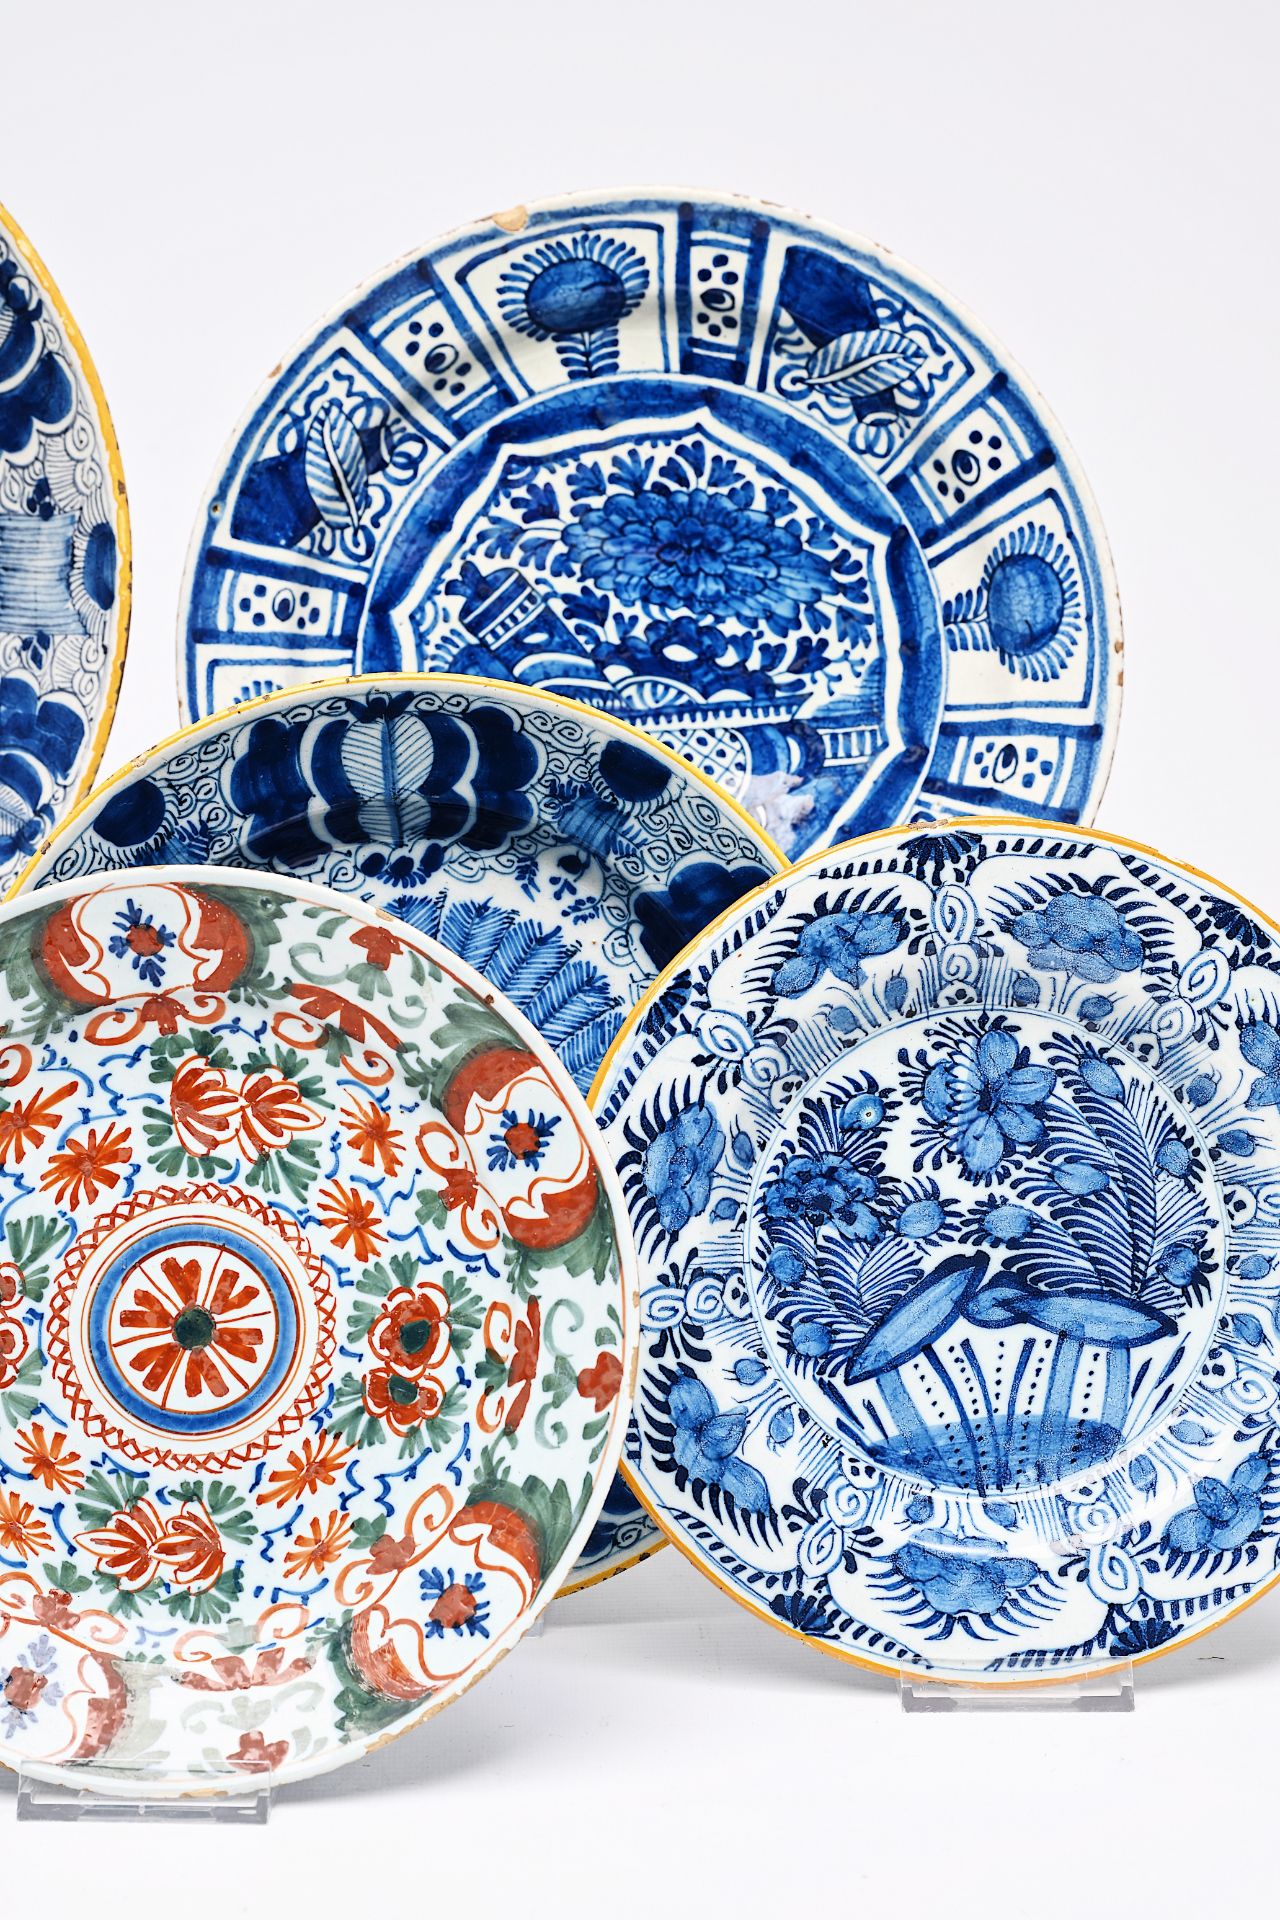 Twelve Dutch Delft blue and white and polychrome plates and dishes, 18th C. - Image 4 of 7